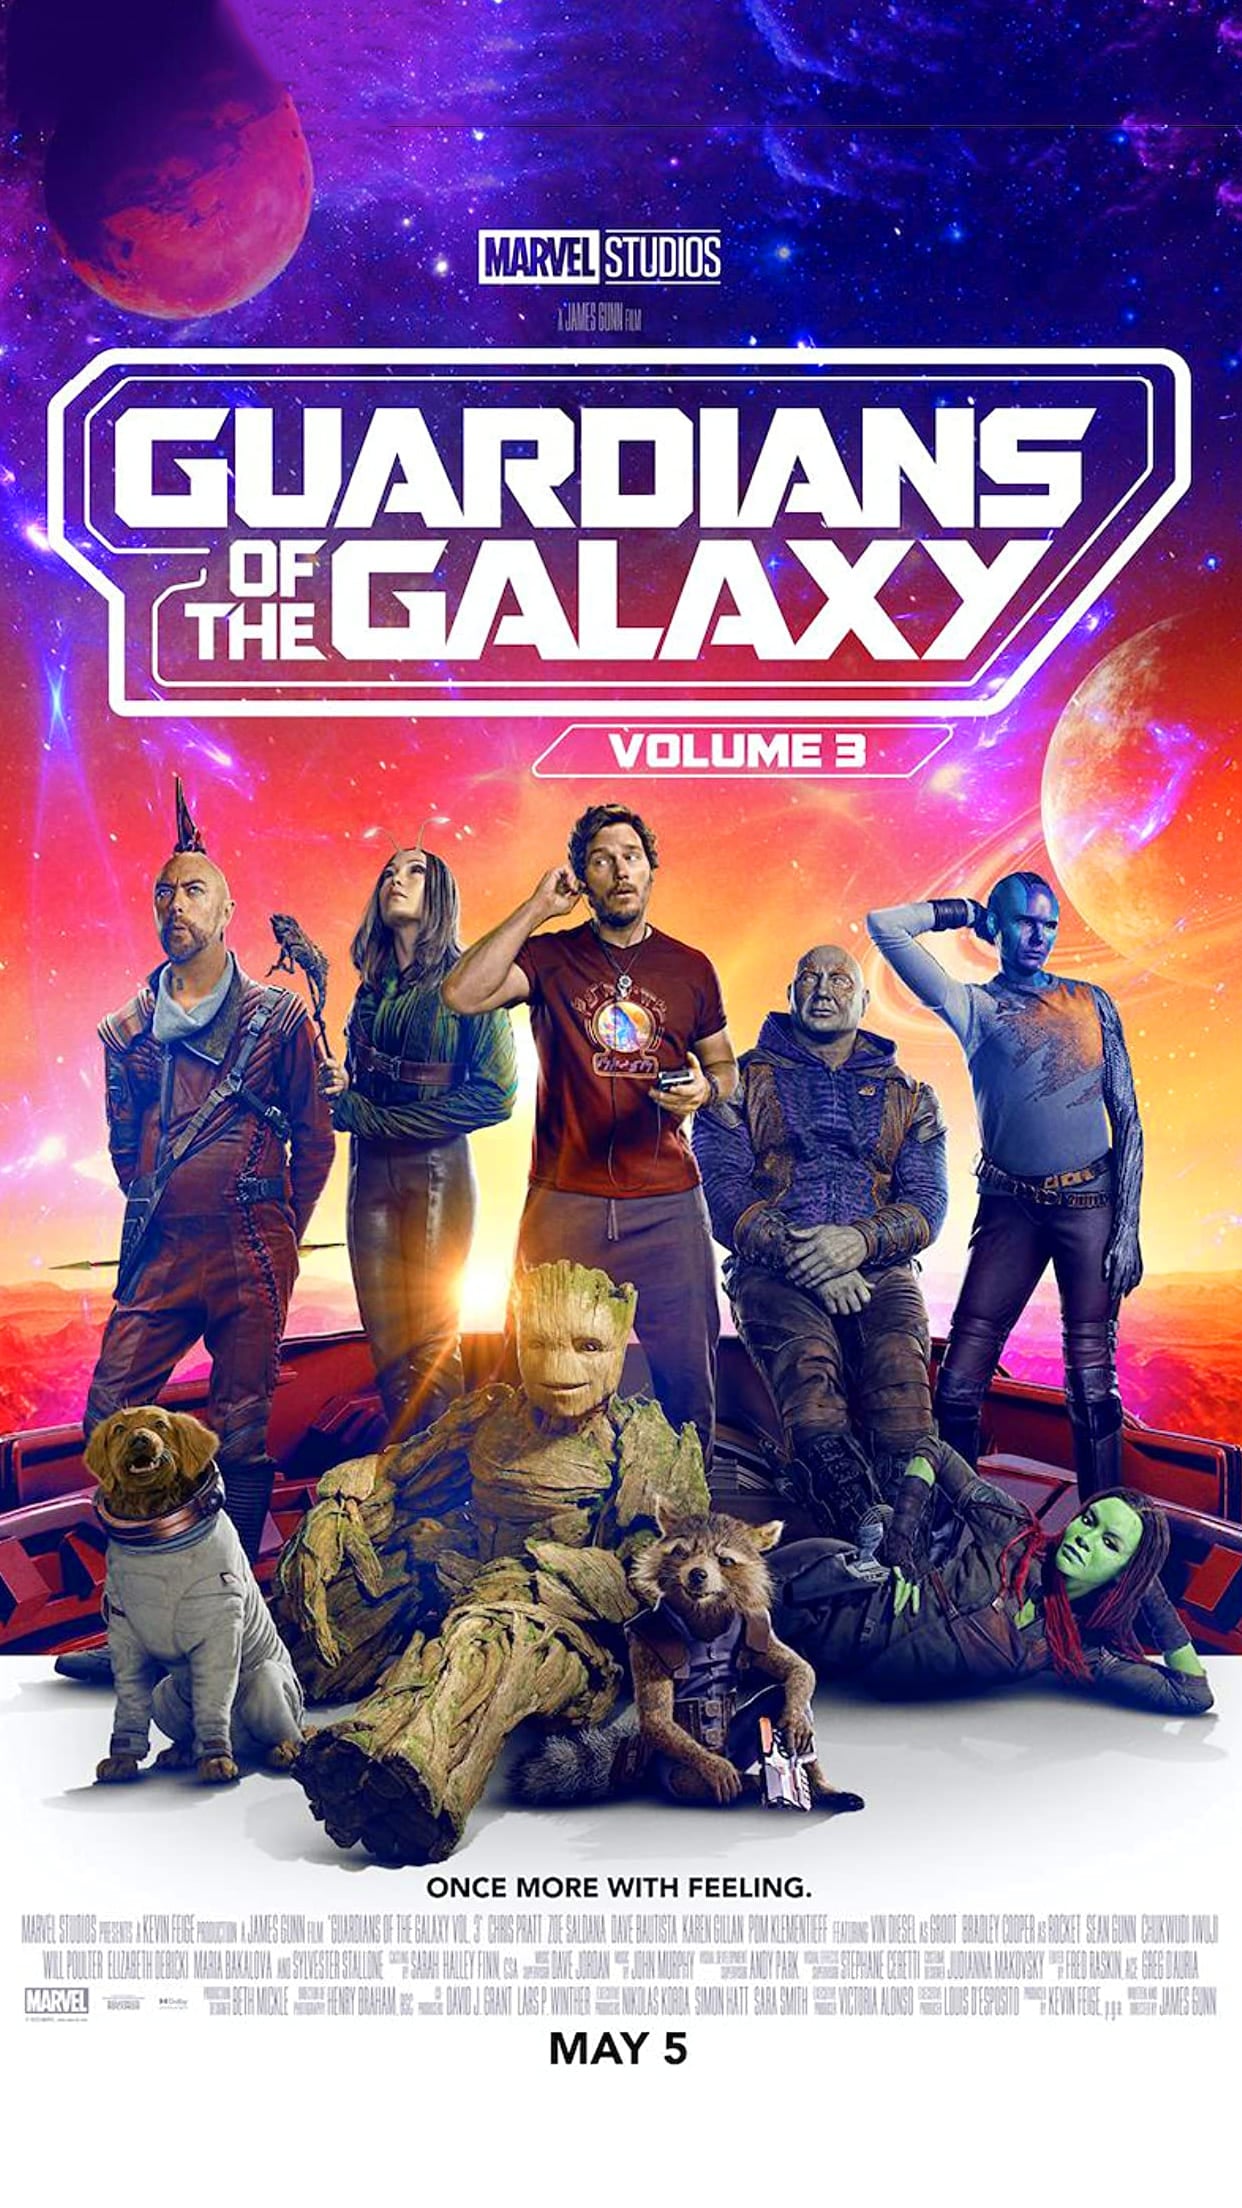 Guardians Of The Galaxy 3 Wallpapers